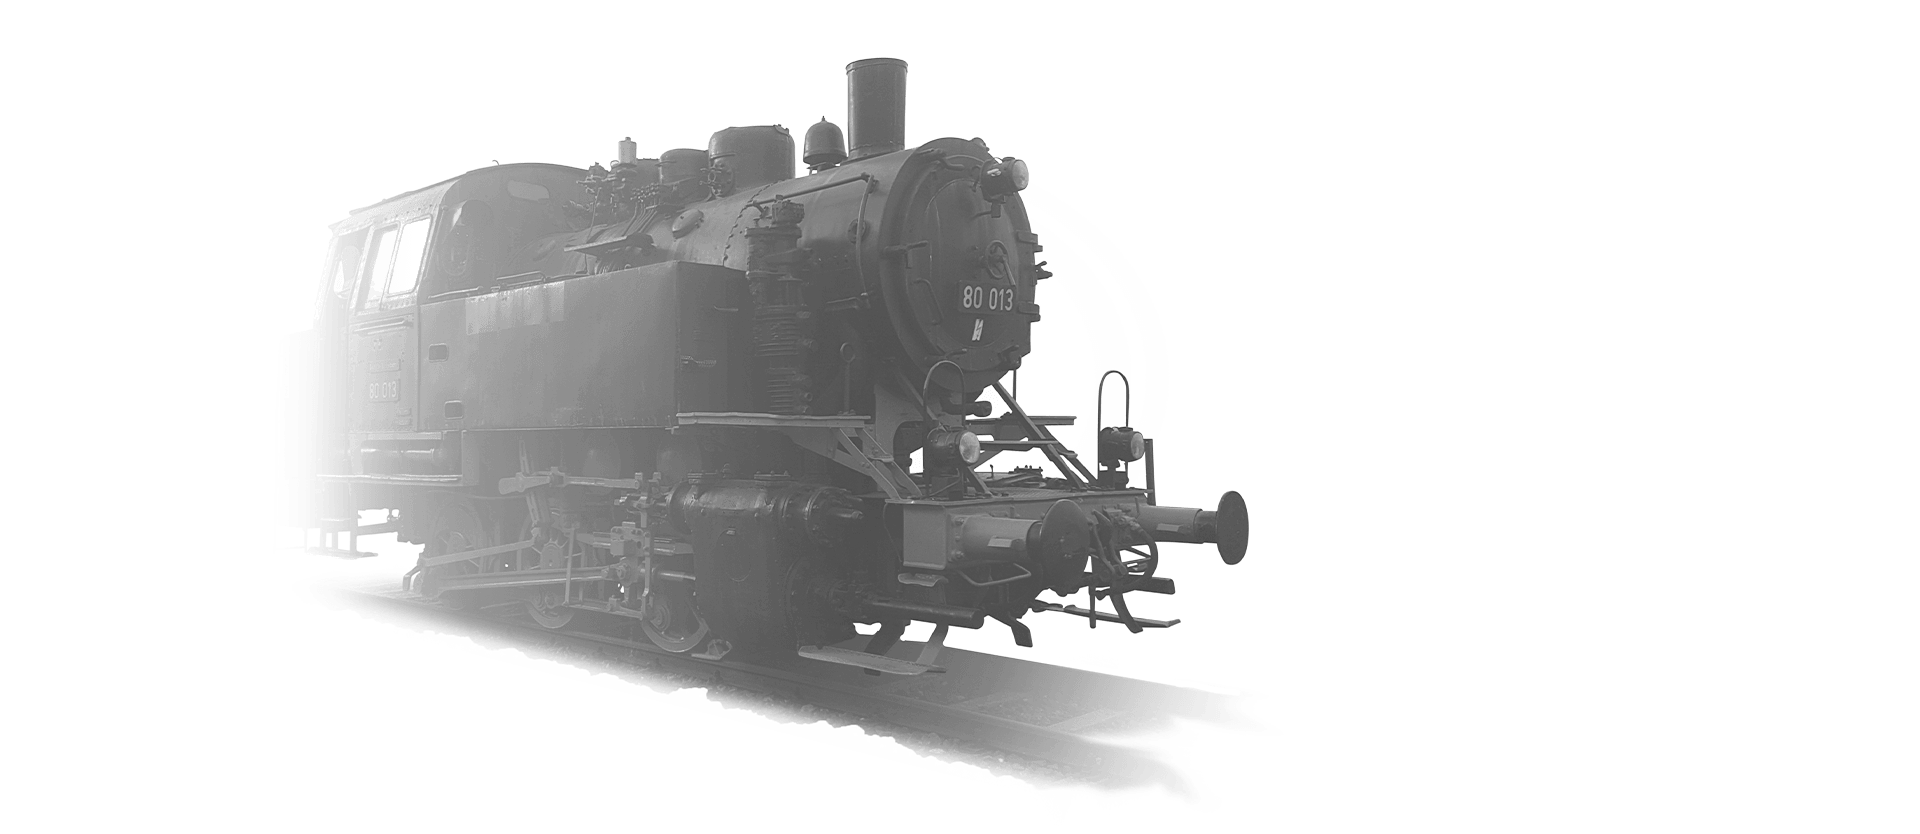 The locomotive 80-013 is coming towards the camera in black and white